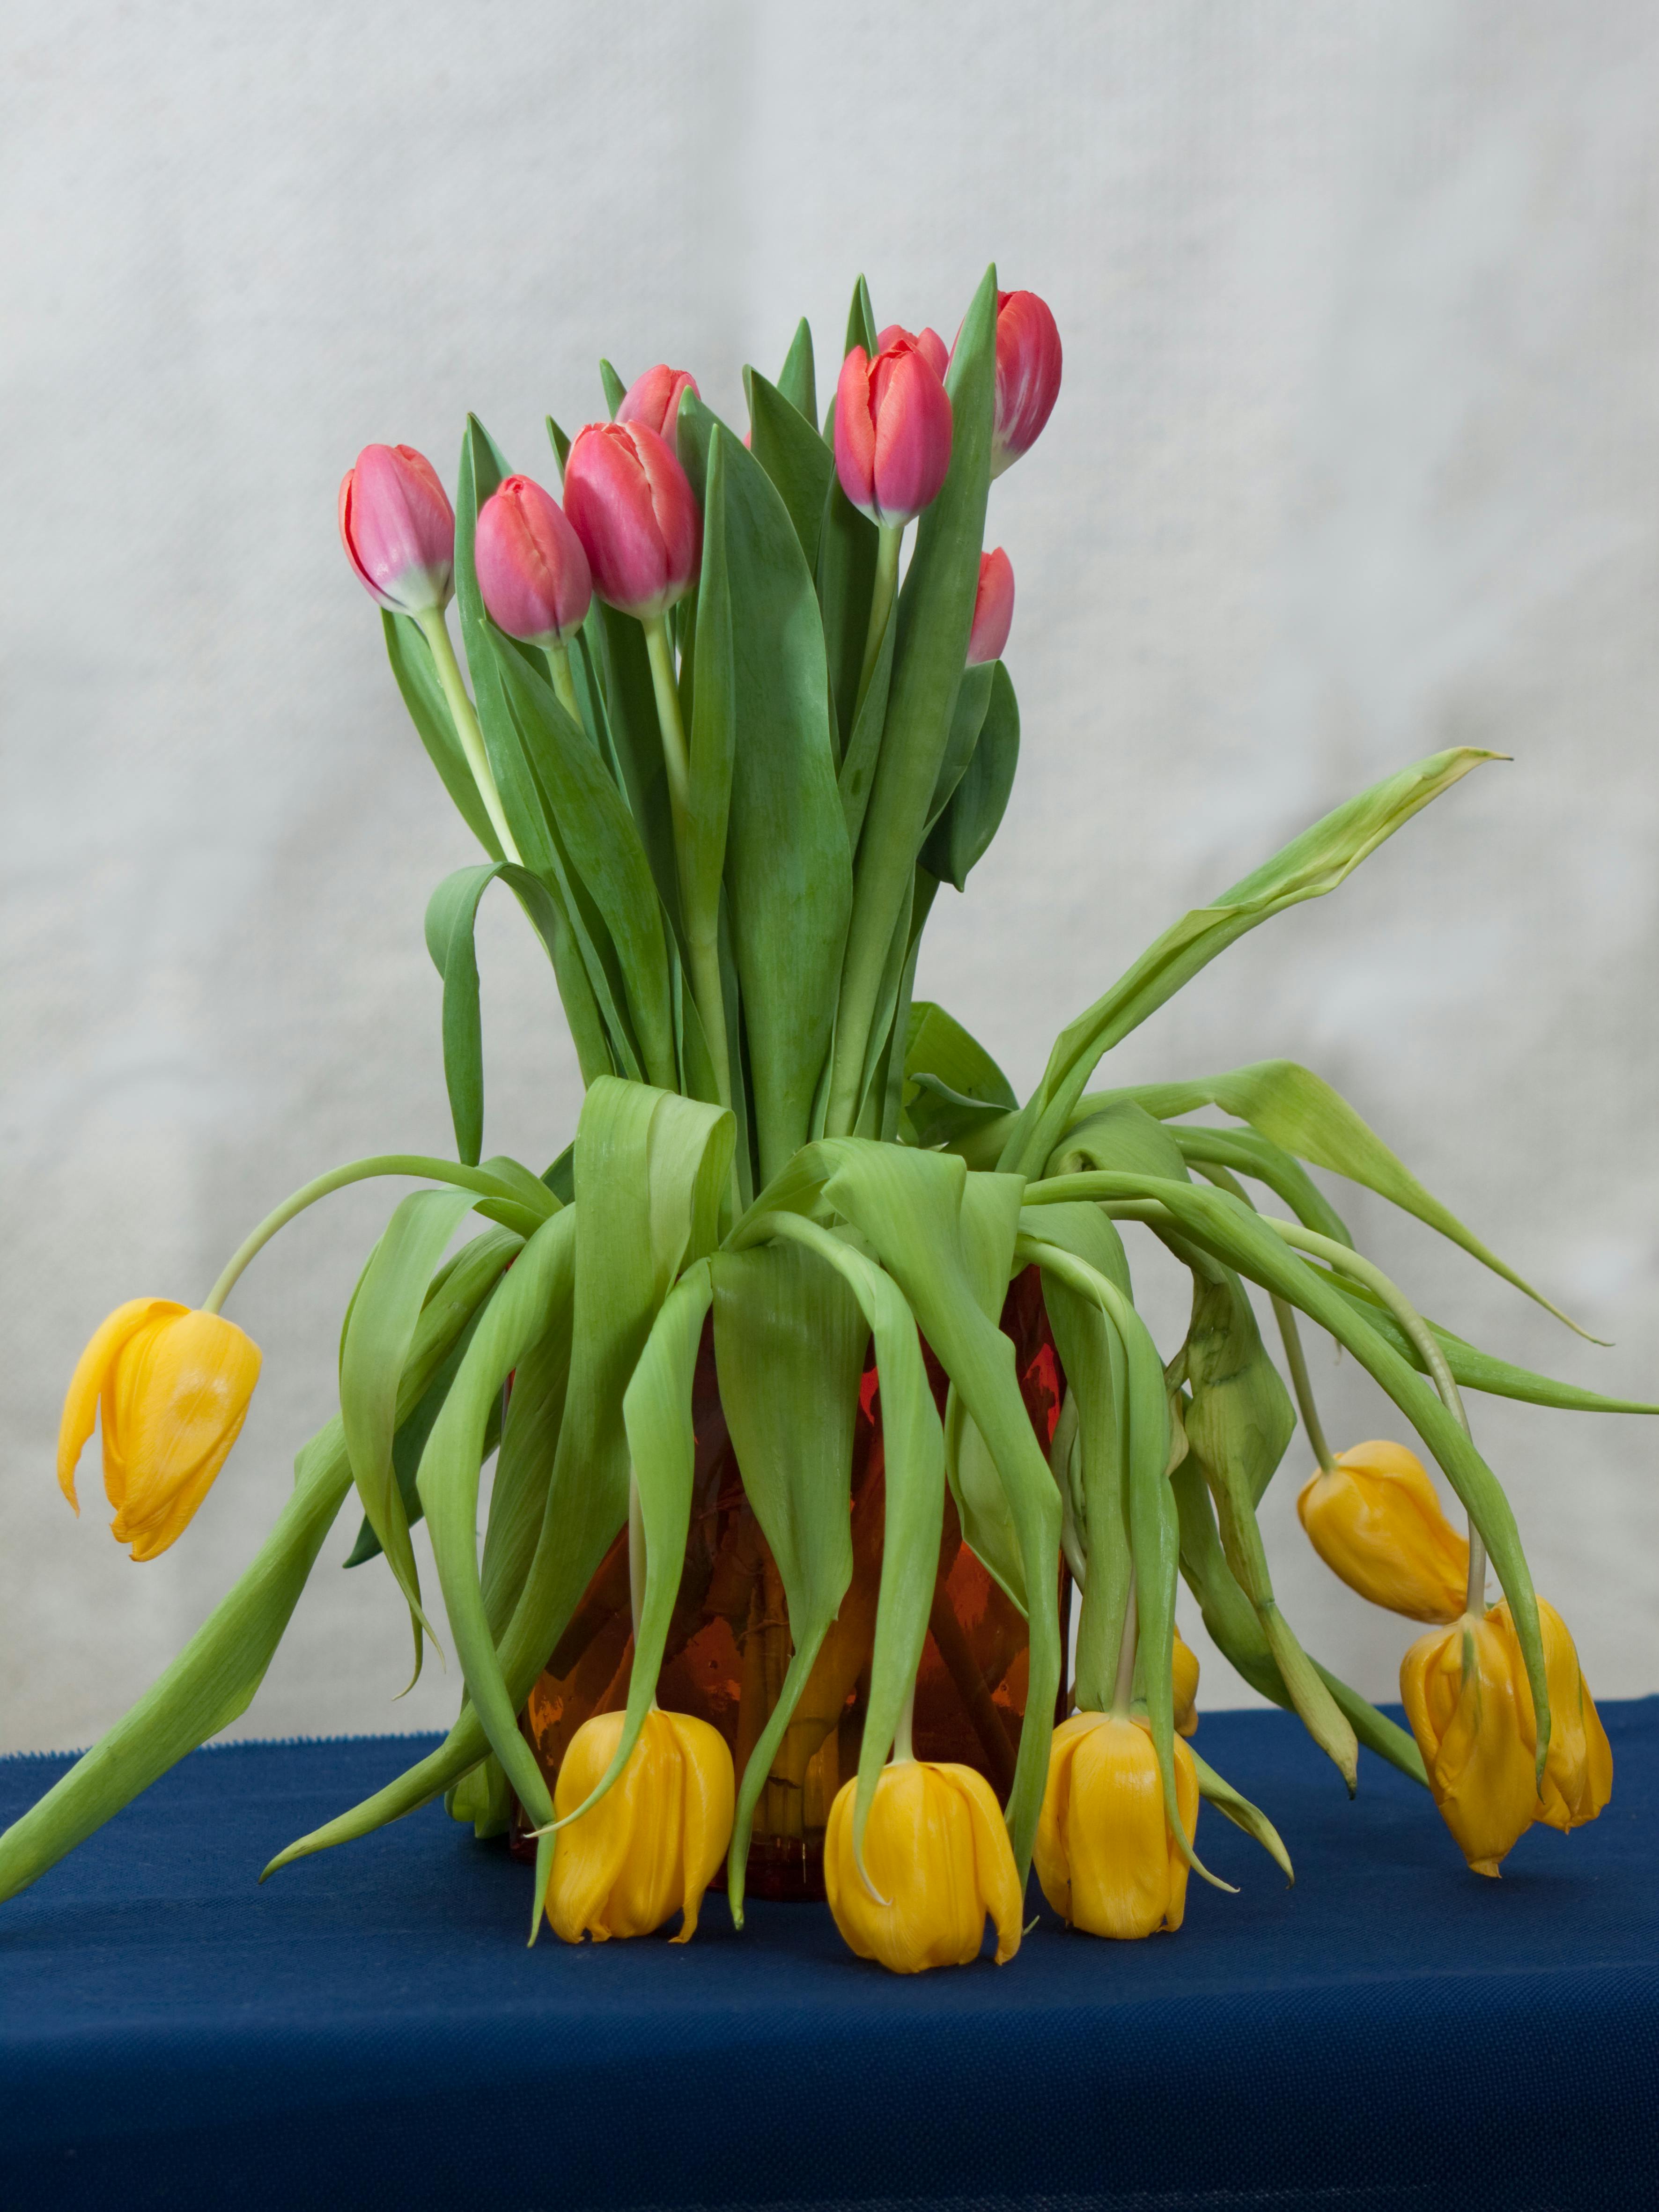 Free stock photo of bunch of flowers, flowers, tulips